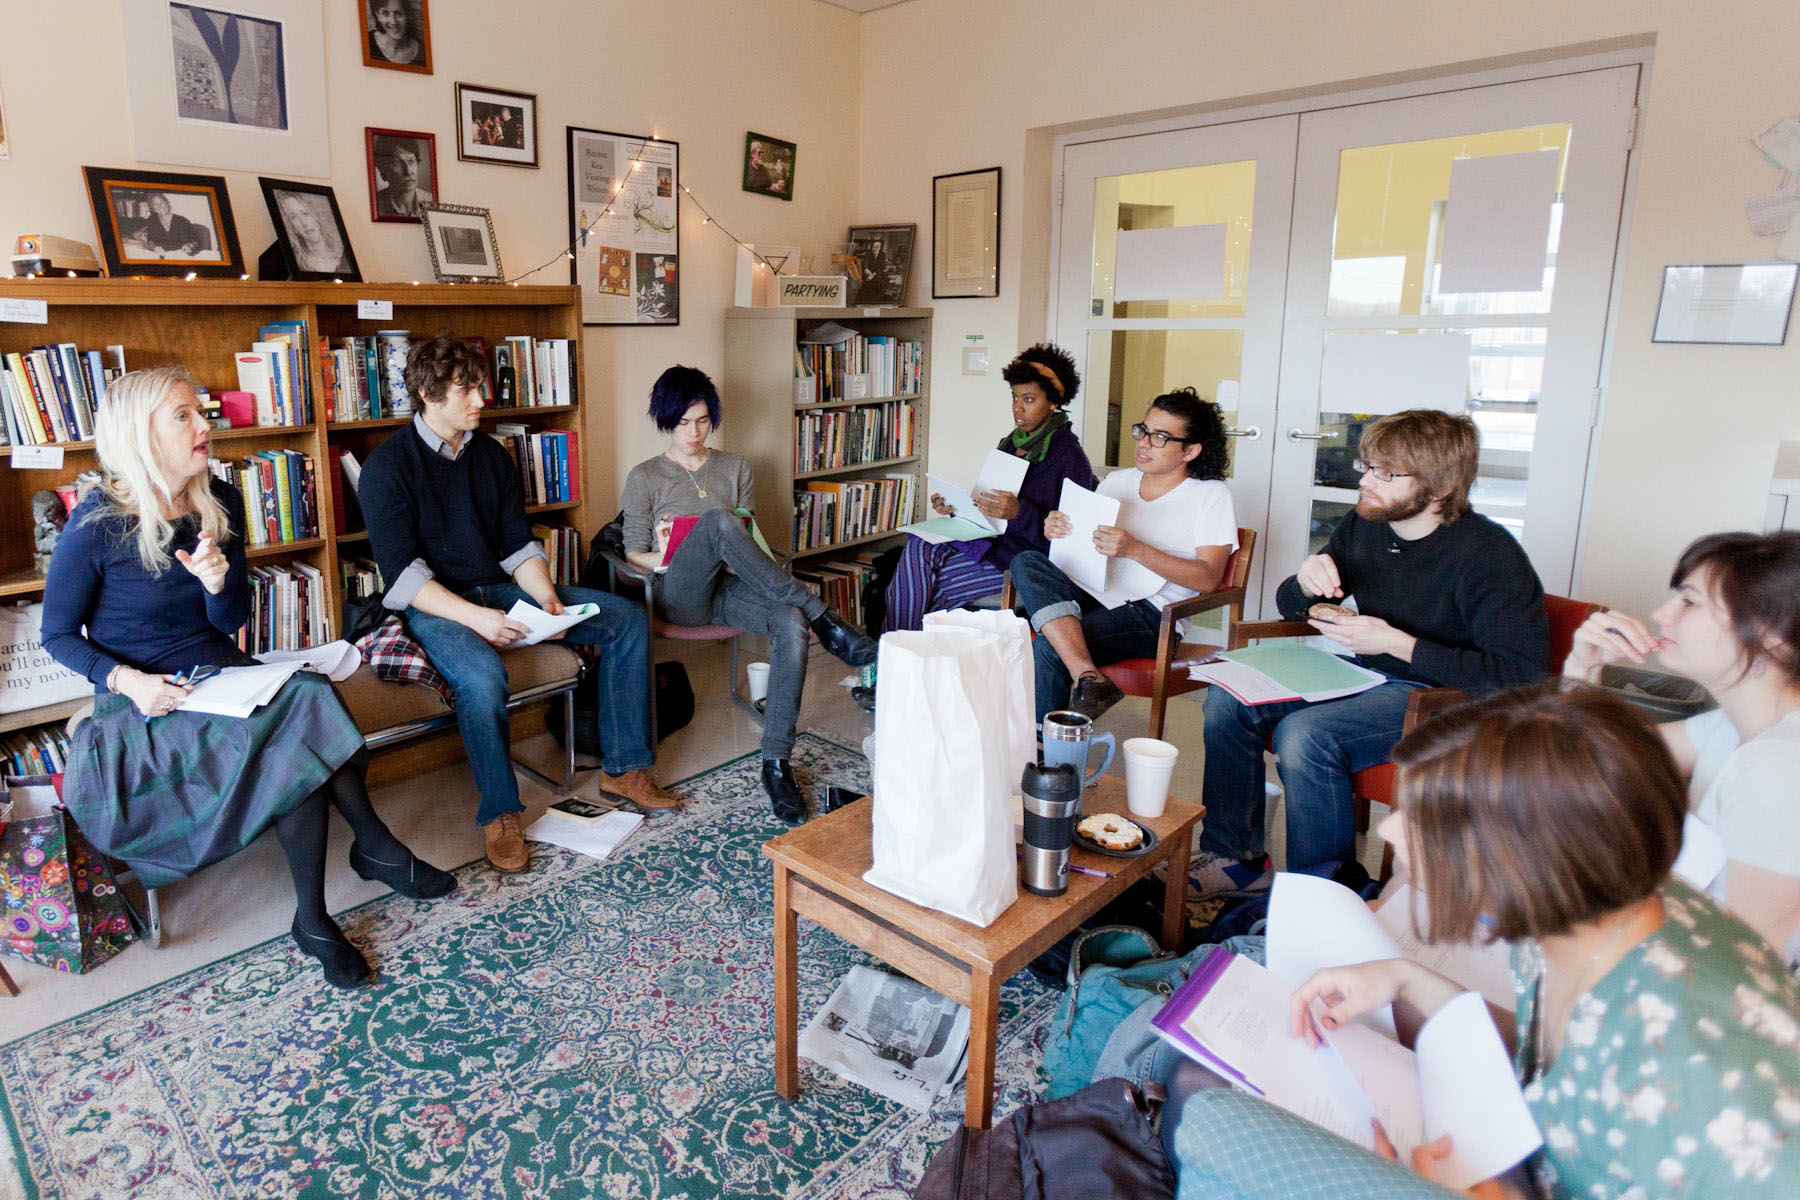 Small Poetry class sitting in a room listening to Lisa Spaars, left, talk